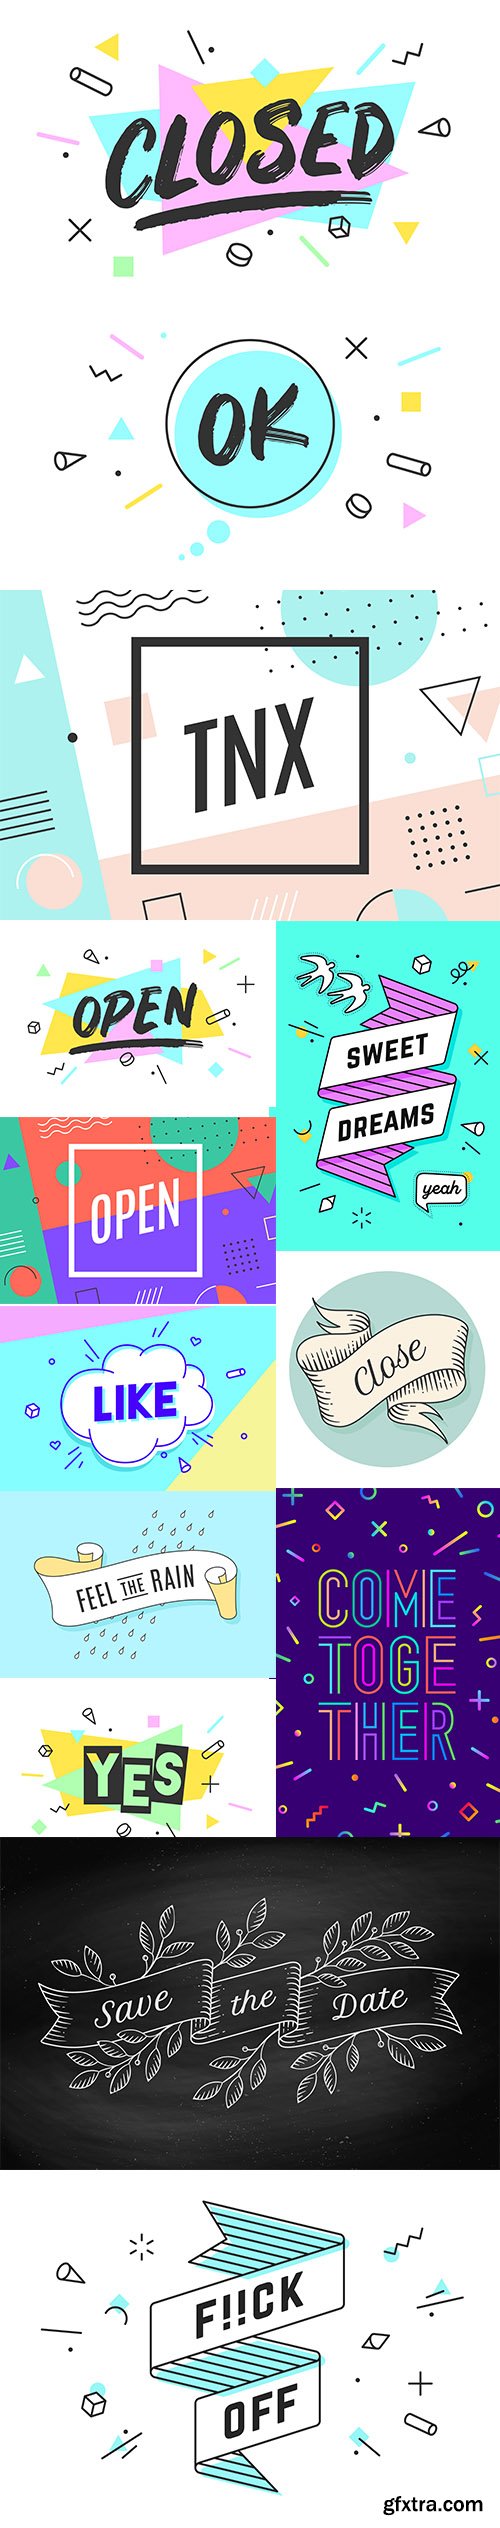 Colorful Graphic Design Banner with Text